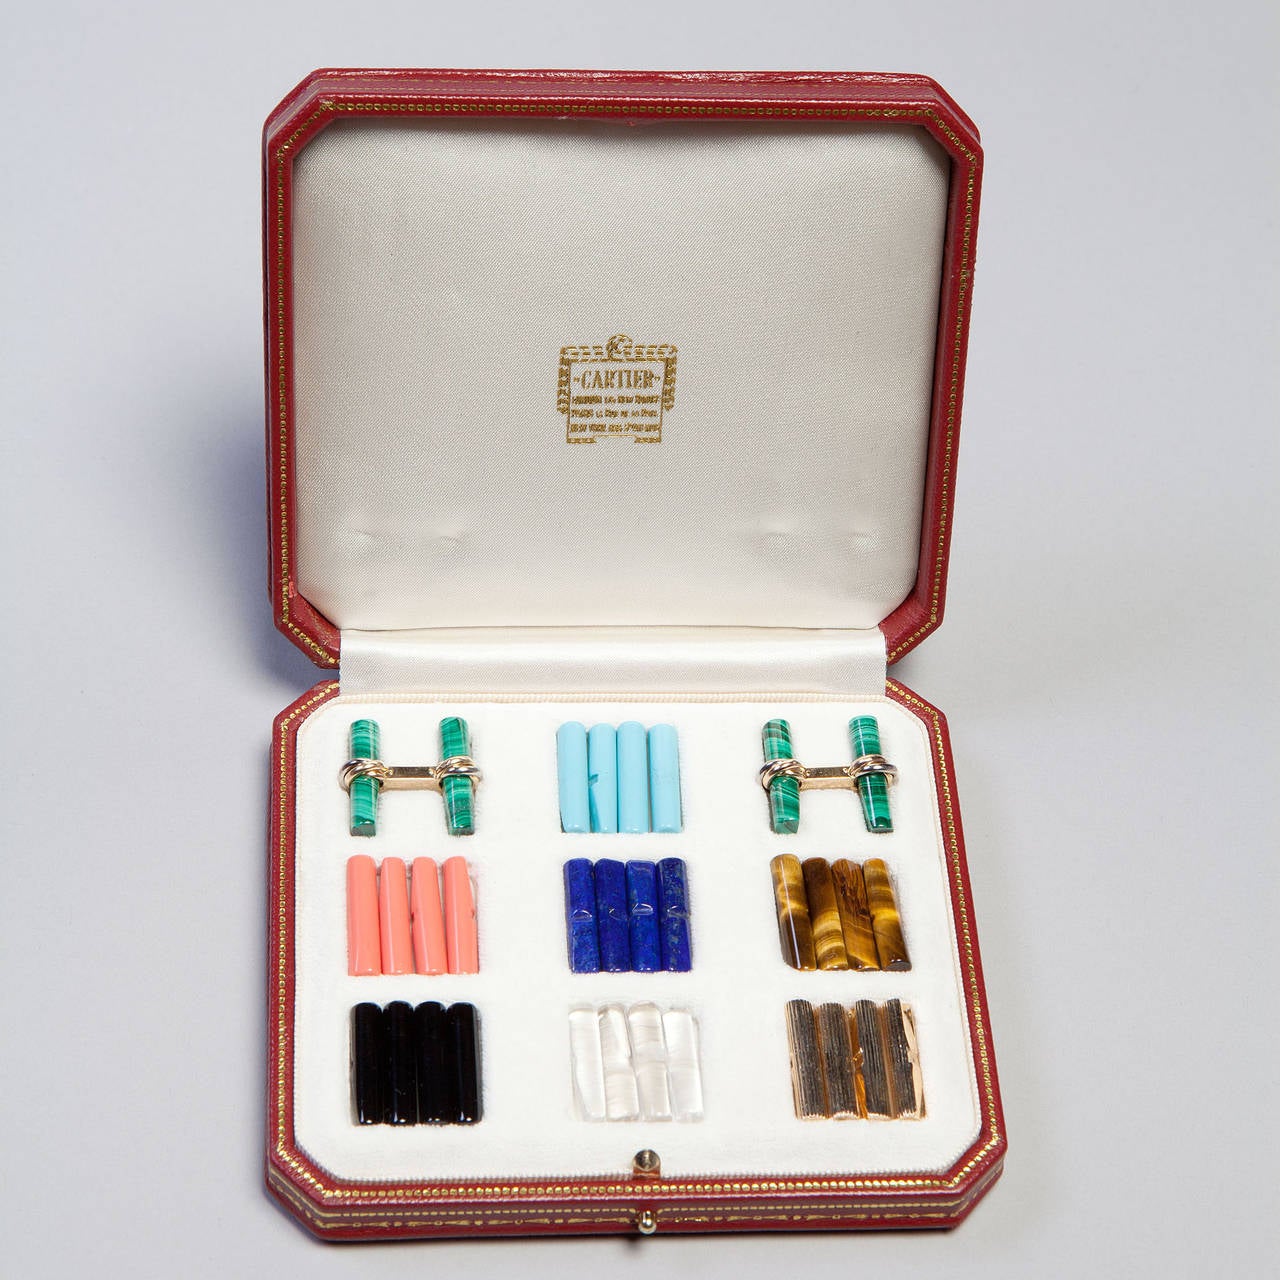 Cartier gem set gold cufflinks In Excellent Condition For Sale In London, GB